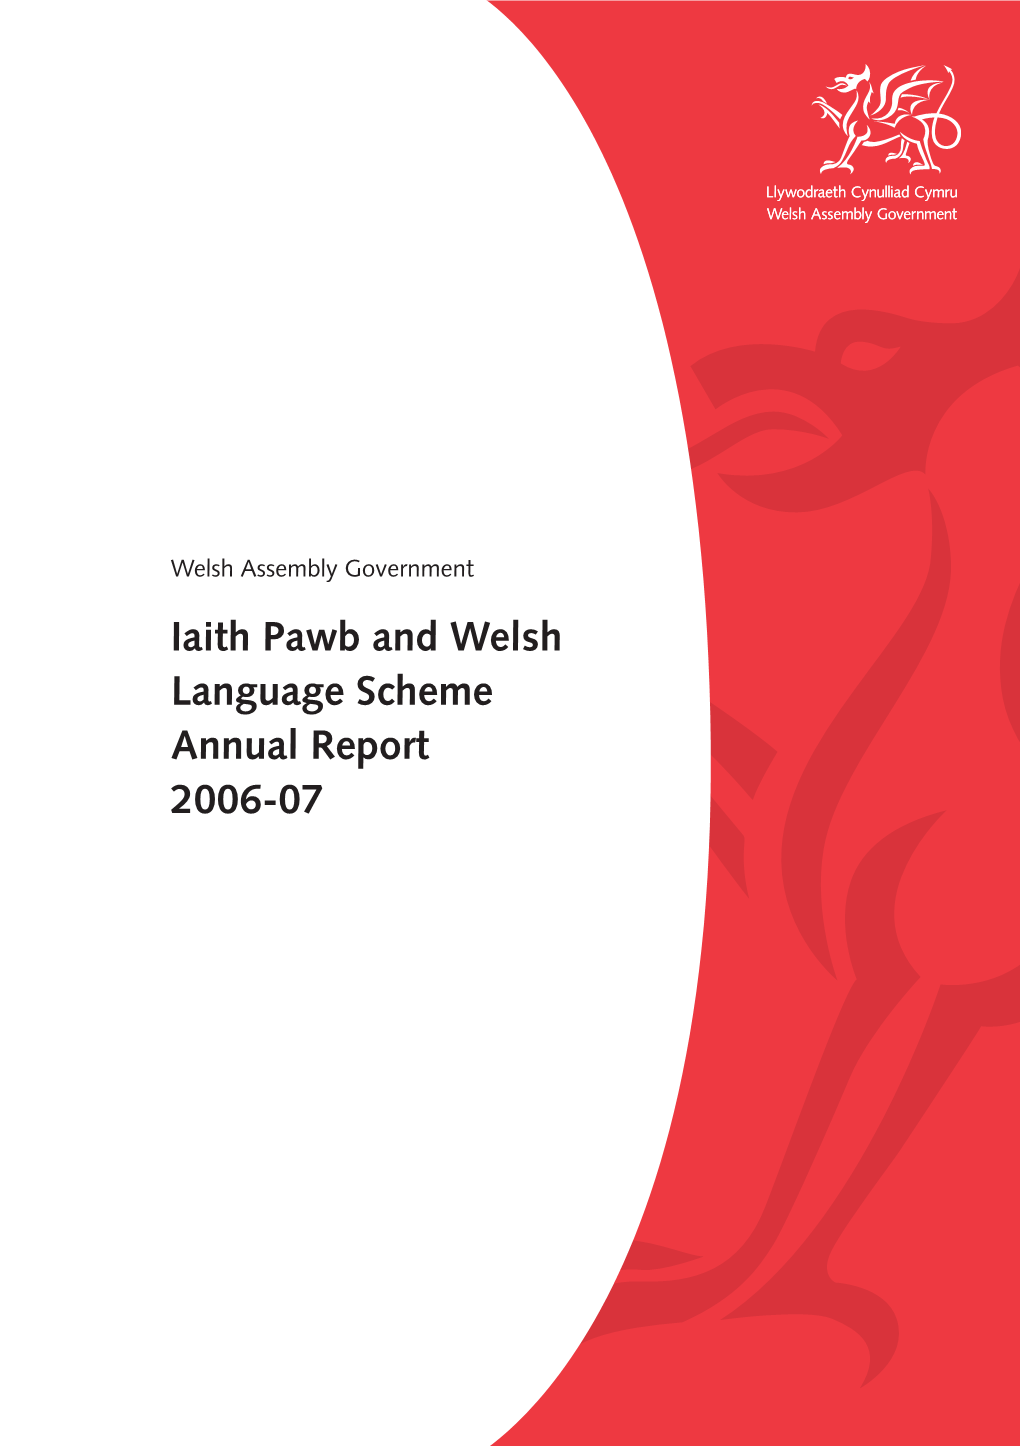 Iaith Pawb and Welsh Language Scheme Annual Report 2006-07